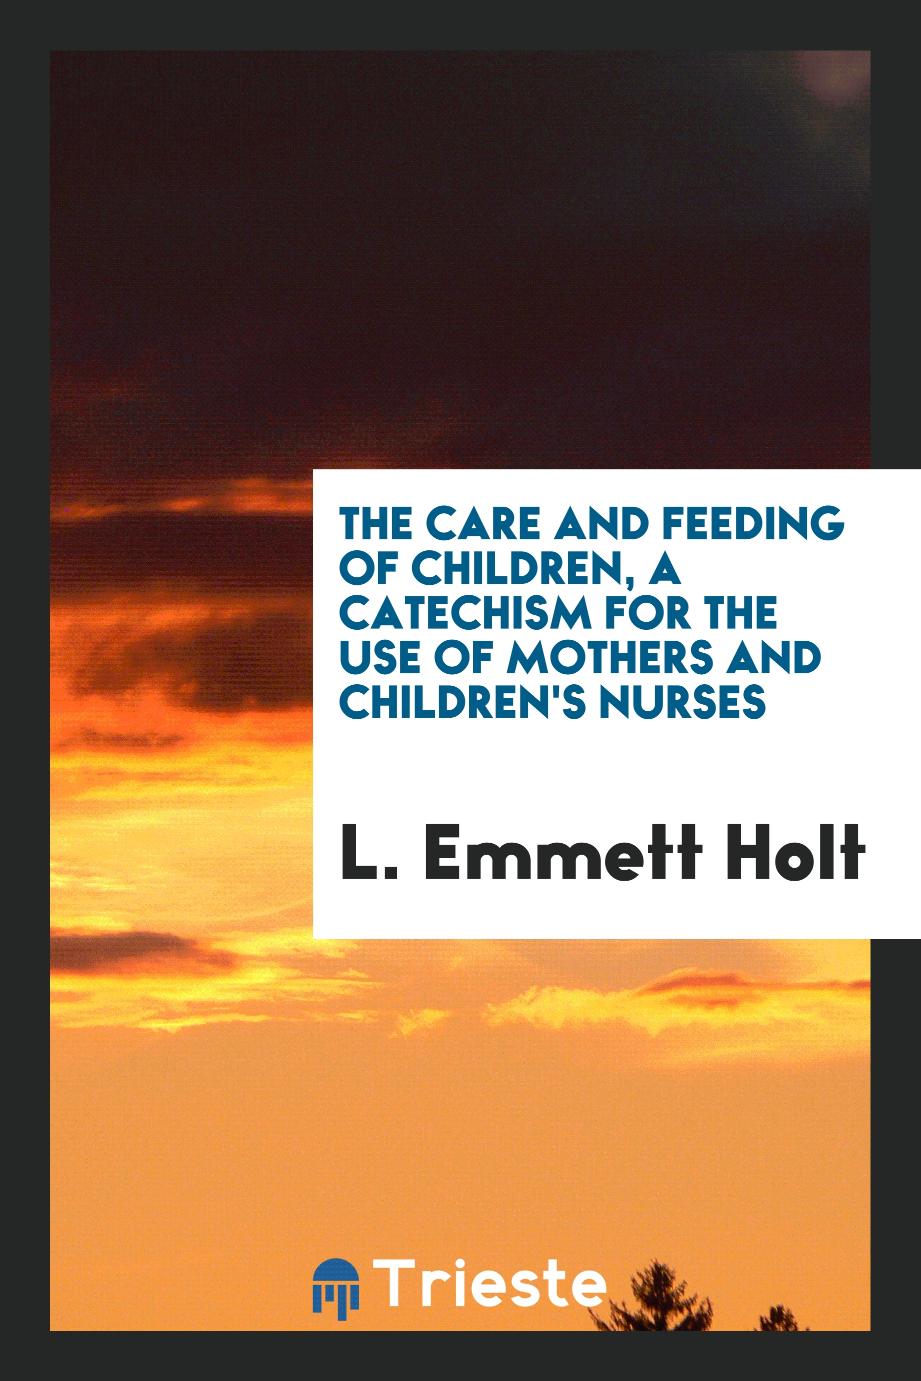 The care and feeding of children, a catechism for the use of mothers and children's nurses